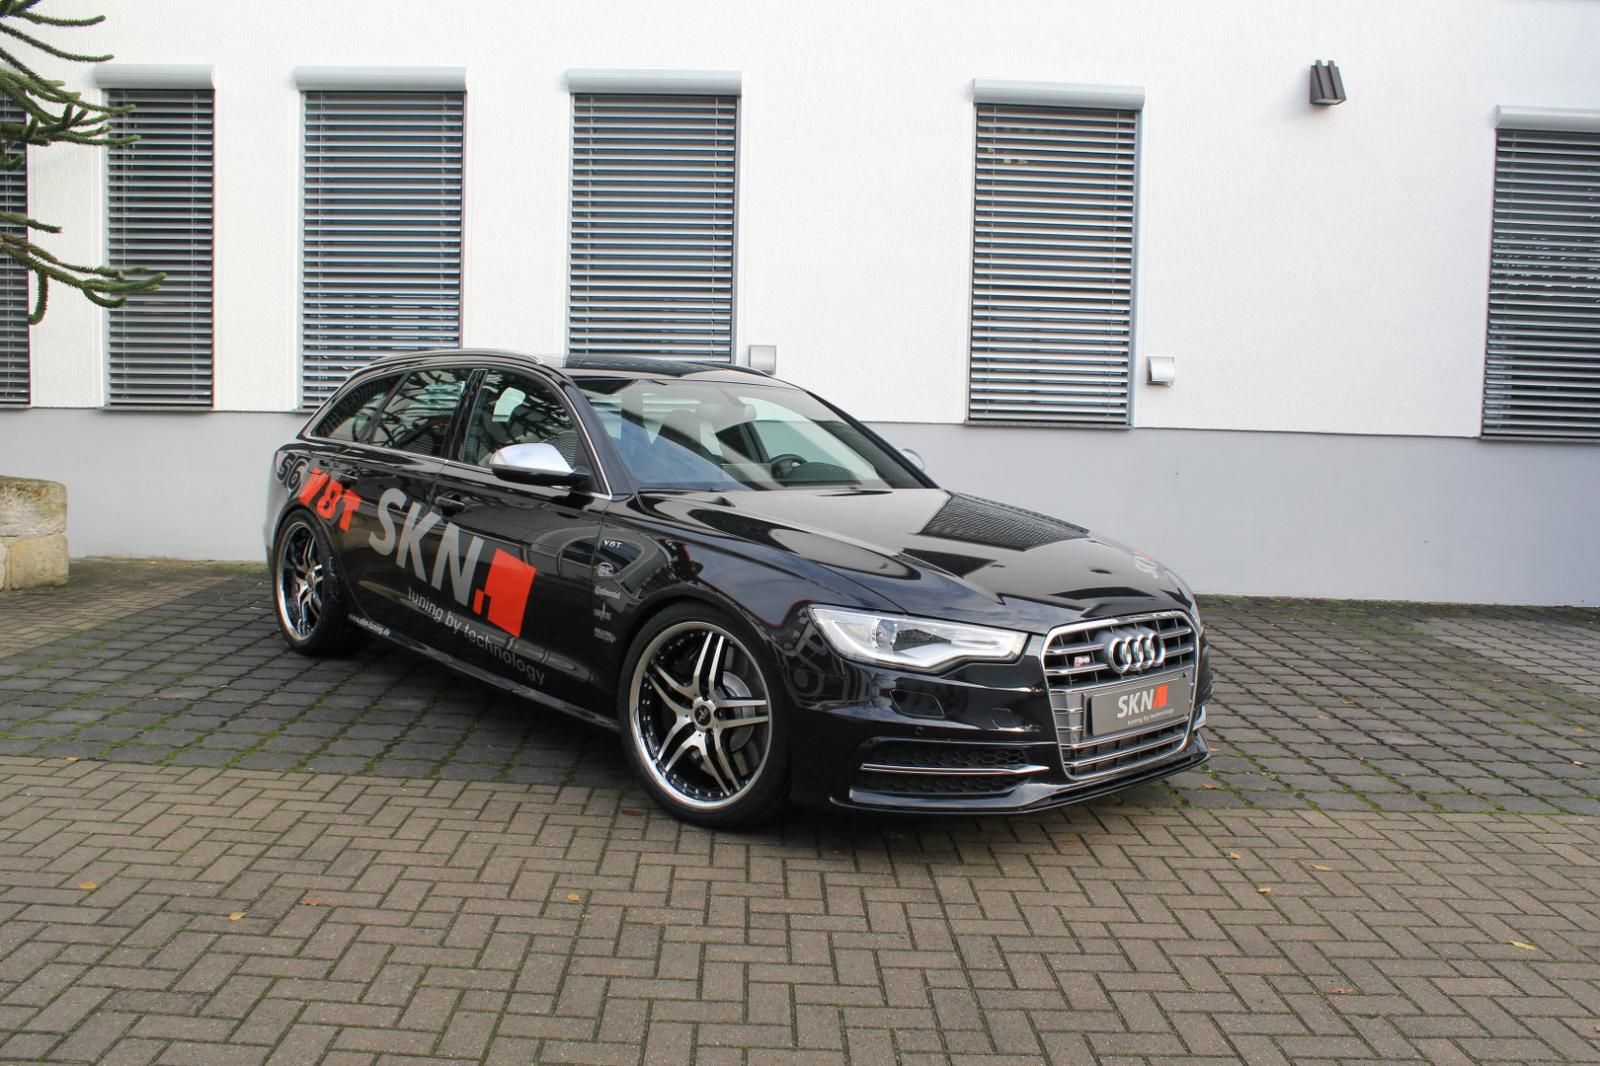 2013 SKN Adds up to 140 Horsepower to the Mighty Audi S6